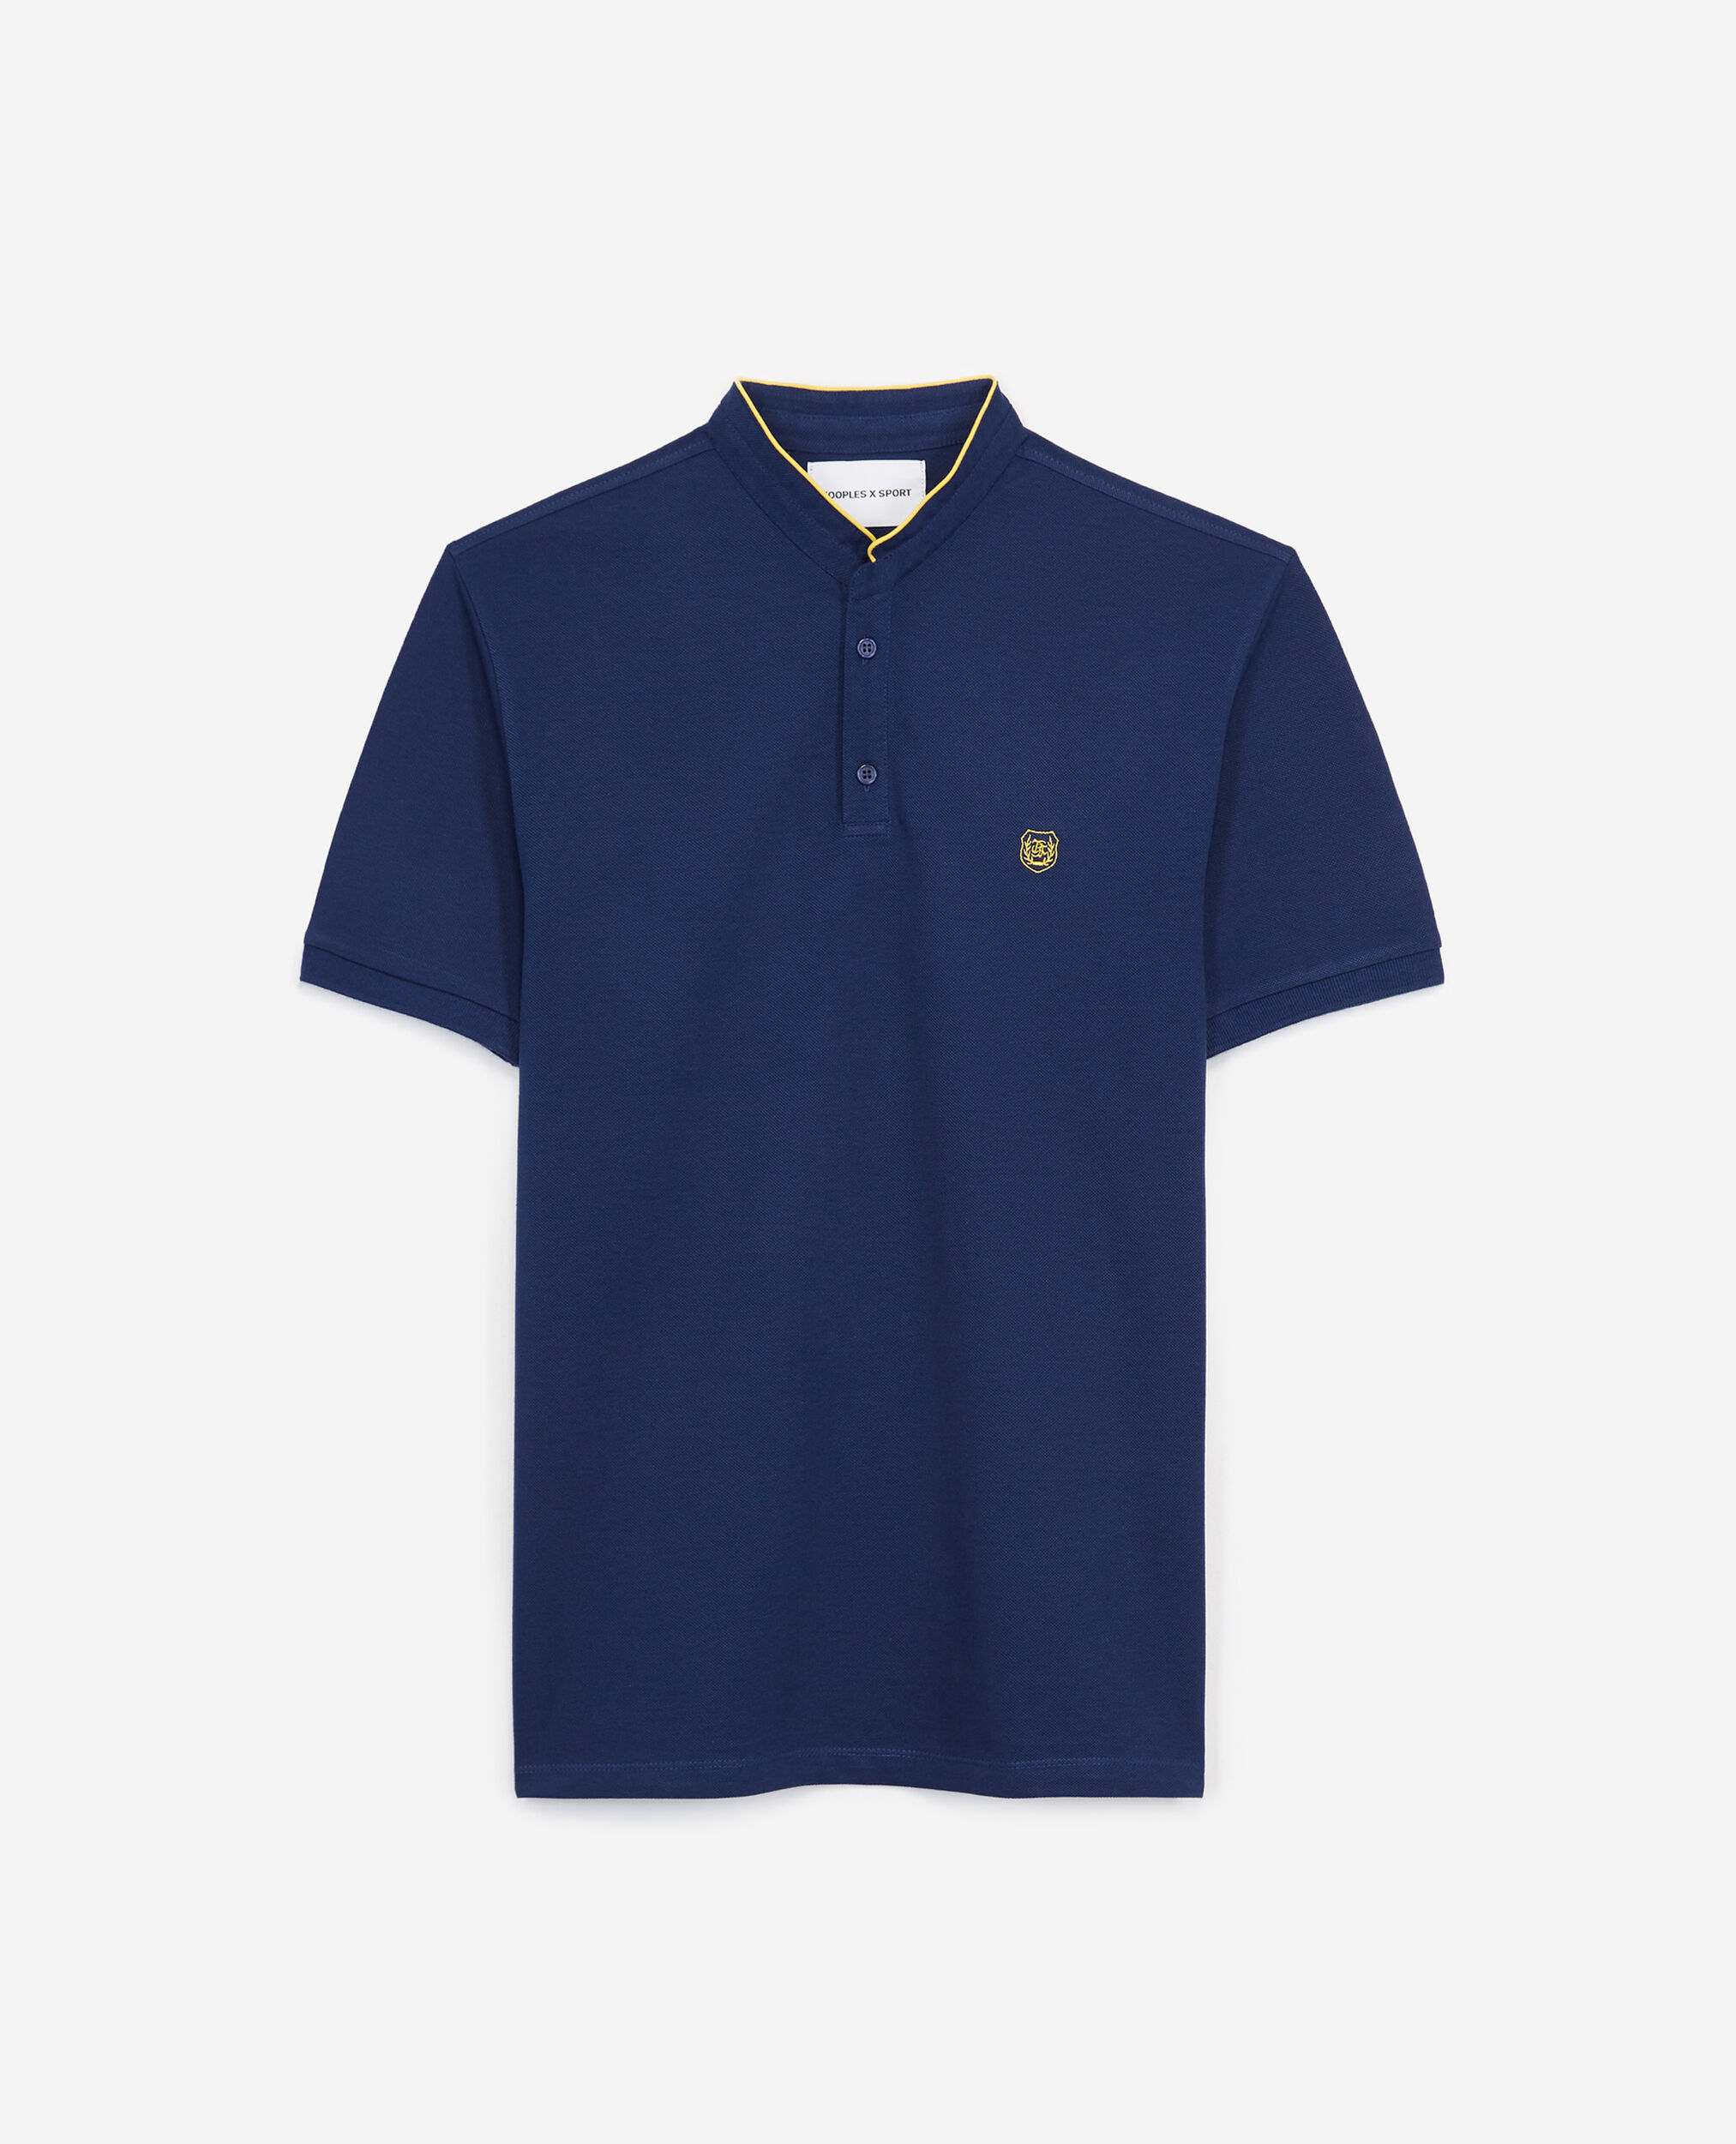 Navy blue polo with light yellow details, OFFICER NVY/DANDELION YLW, hi-res image number null